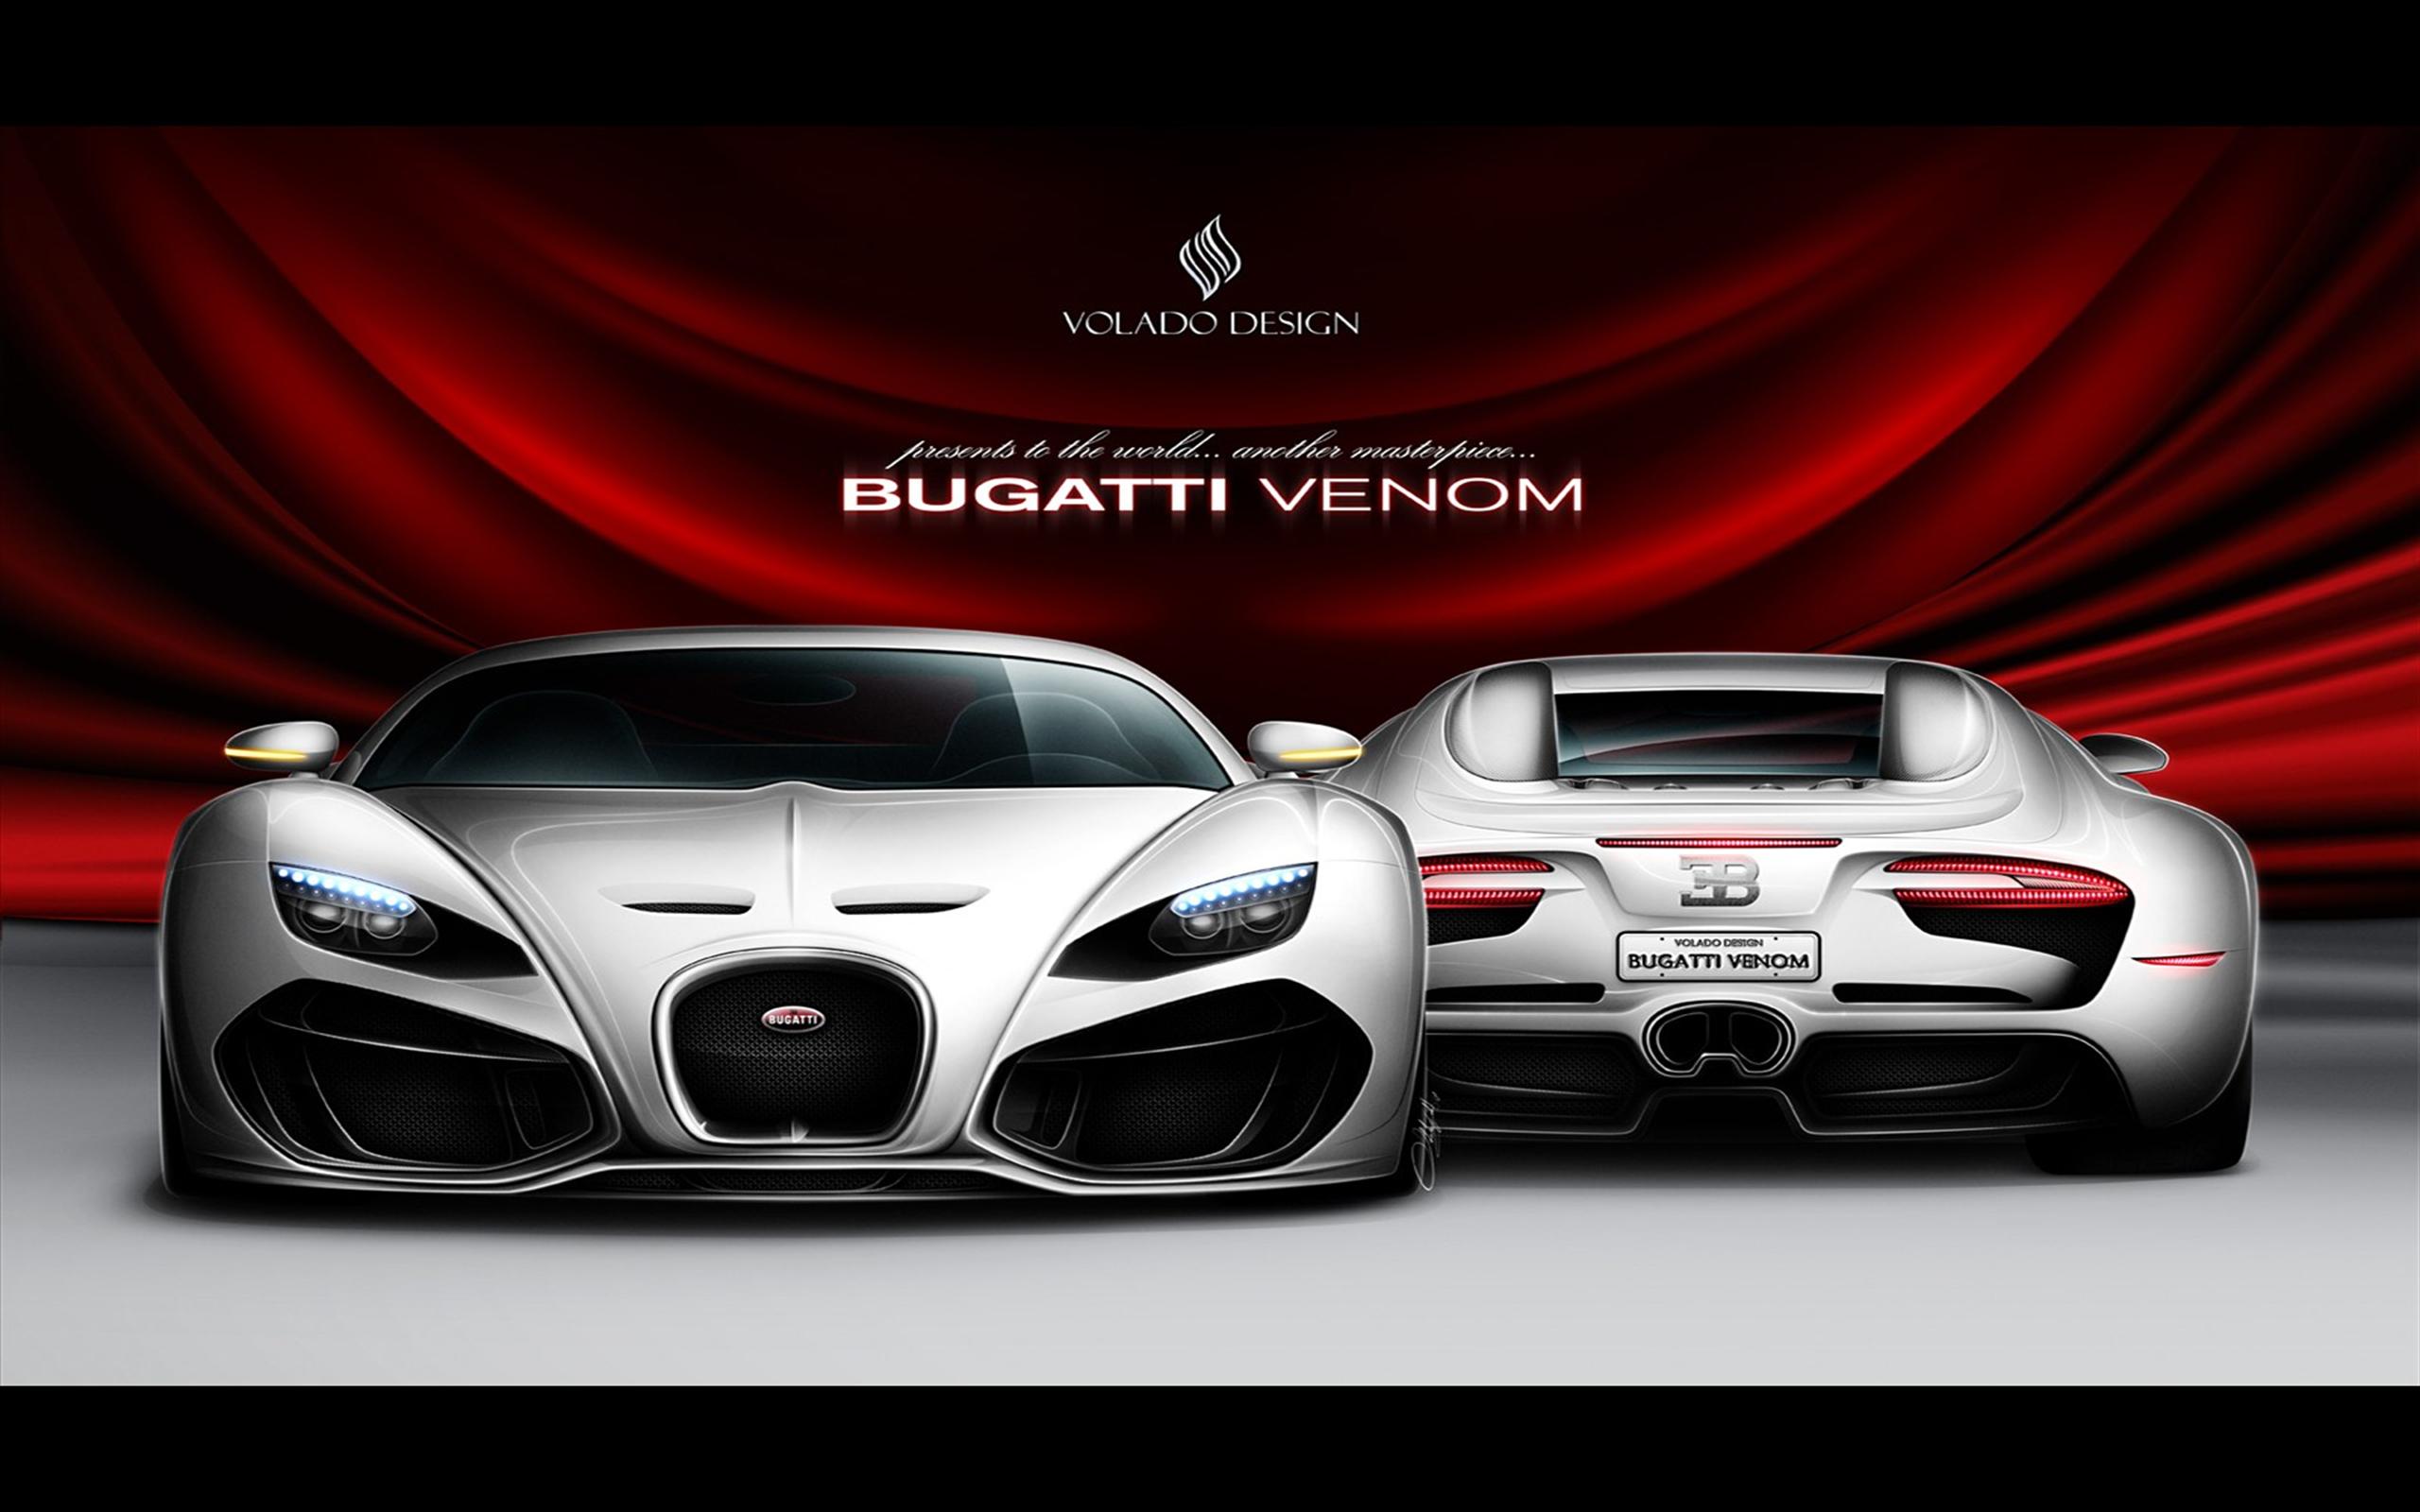 Bugatti Venom Concept High Quality And With Resolutions